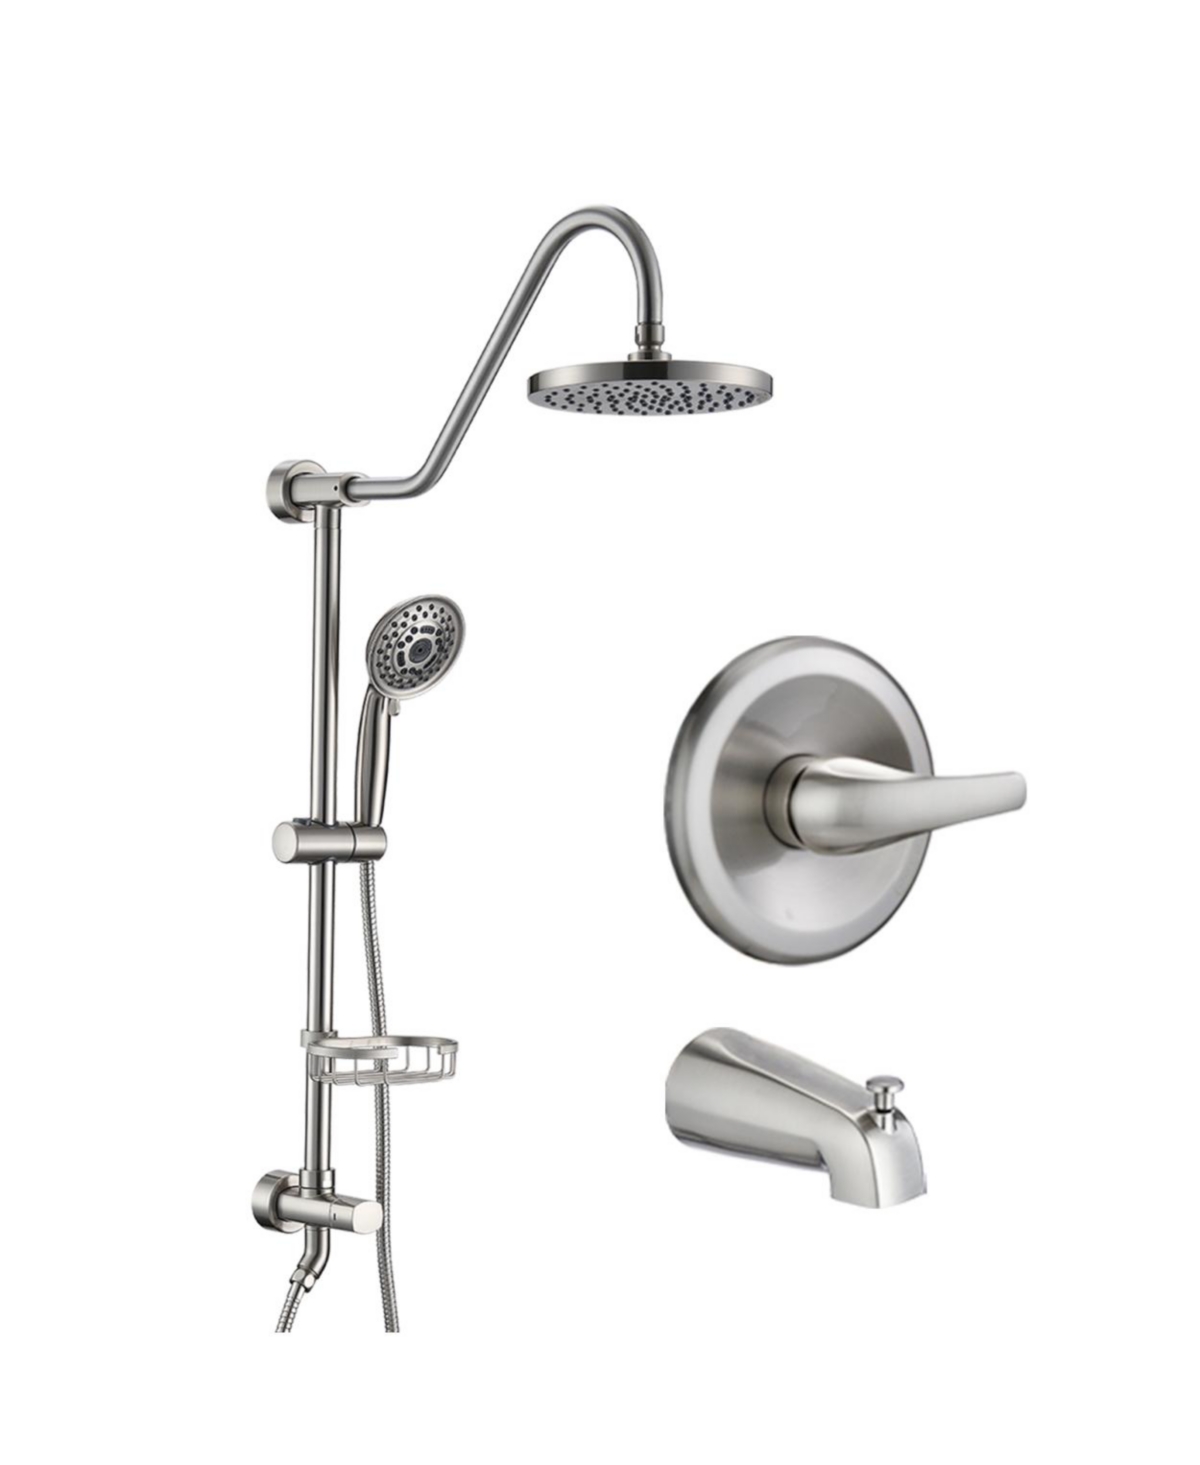 8" Rain Shower Head with Handheld System and Tub Spout - Silver